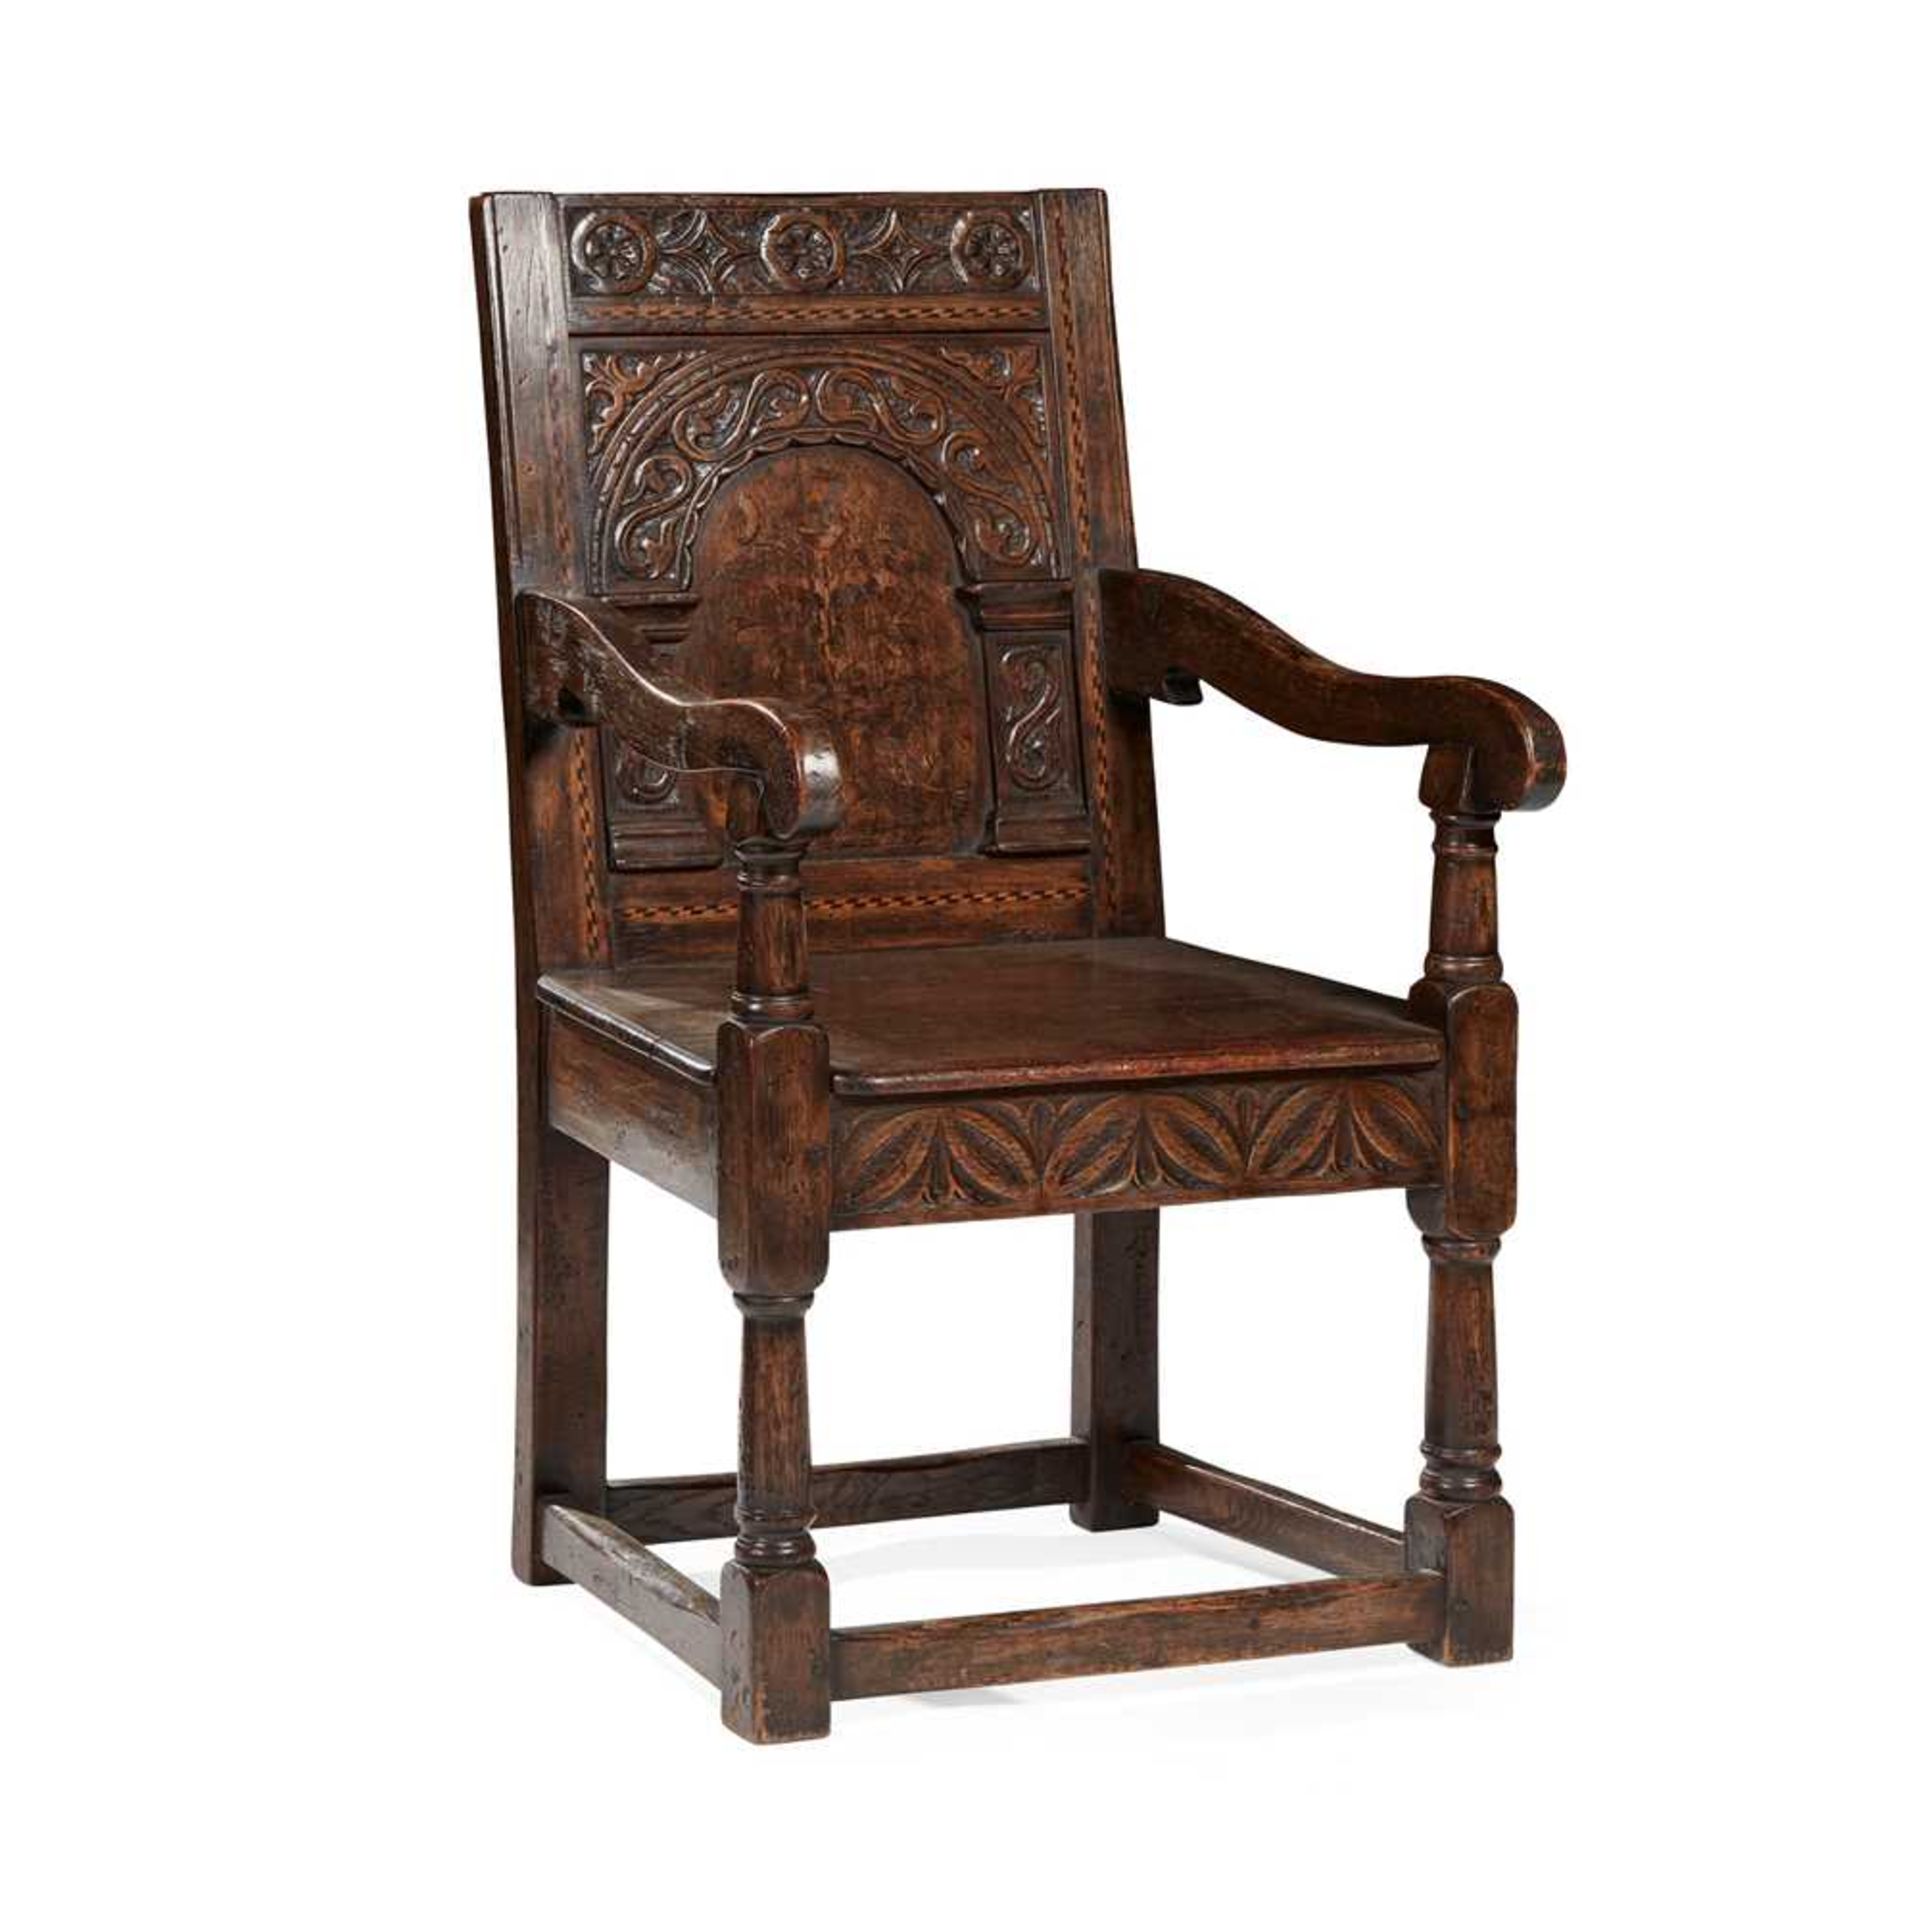 CHARLES II OAK AND MARQUETRY ARMCHAIR 17TH CENTURY - Image 2 of 2